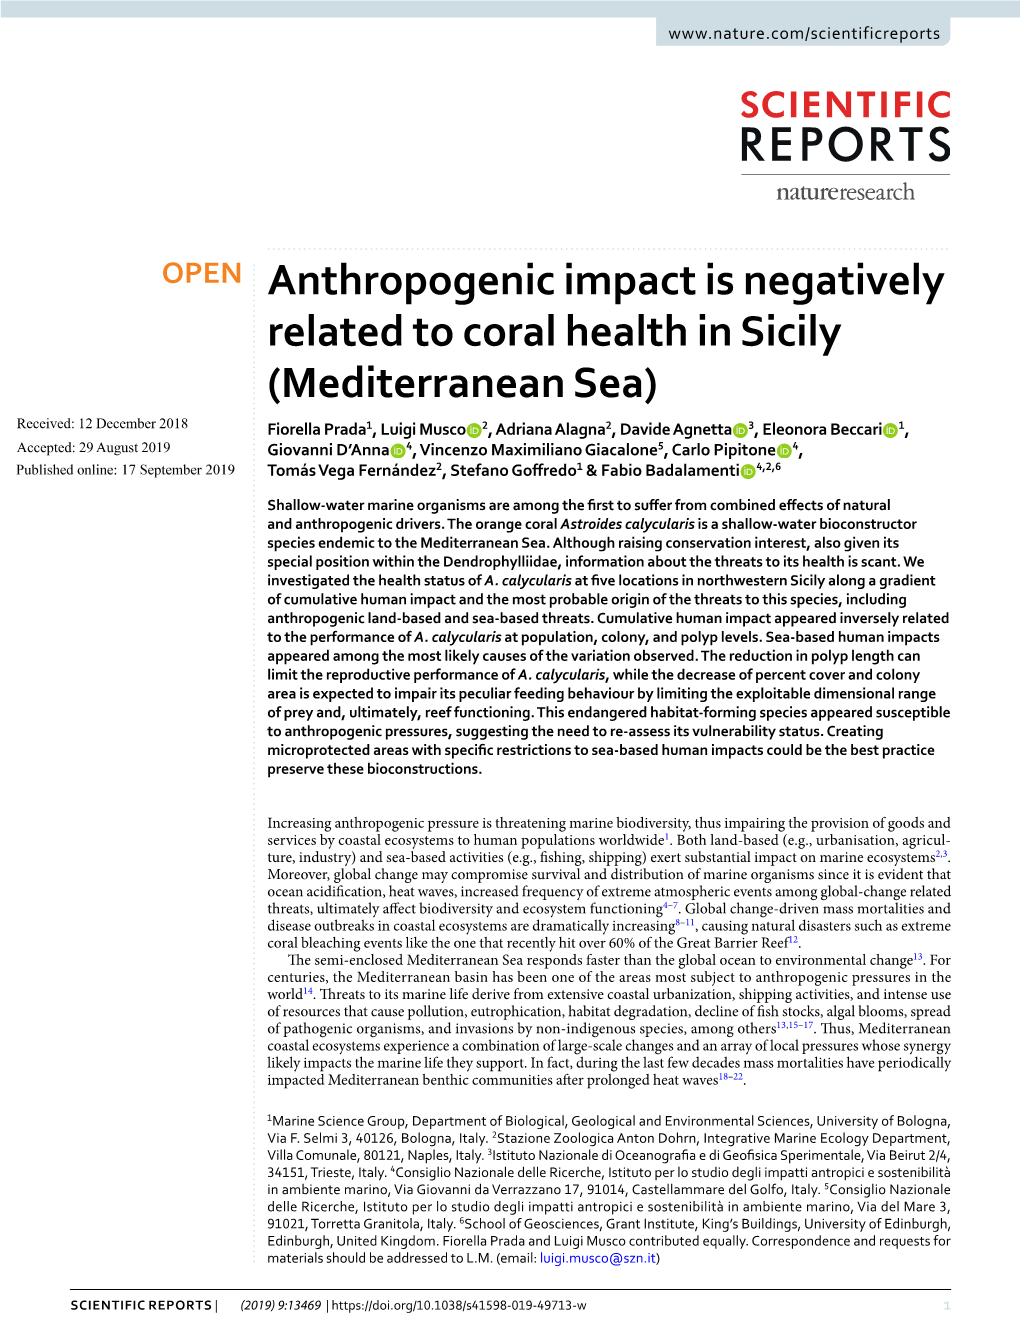 Anthropogenic Impact Is Negatively Related to Coral Health in Sicily